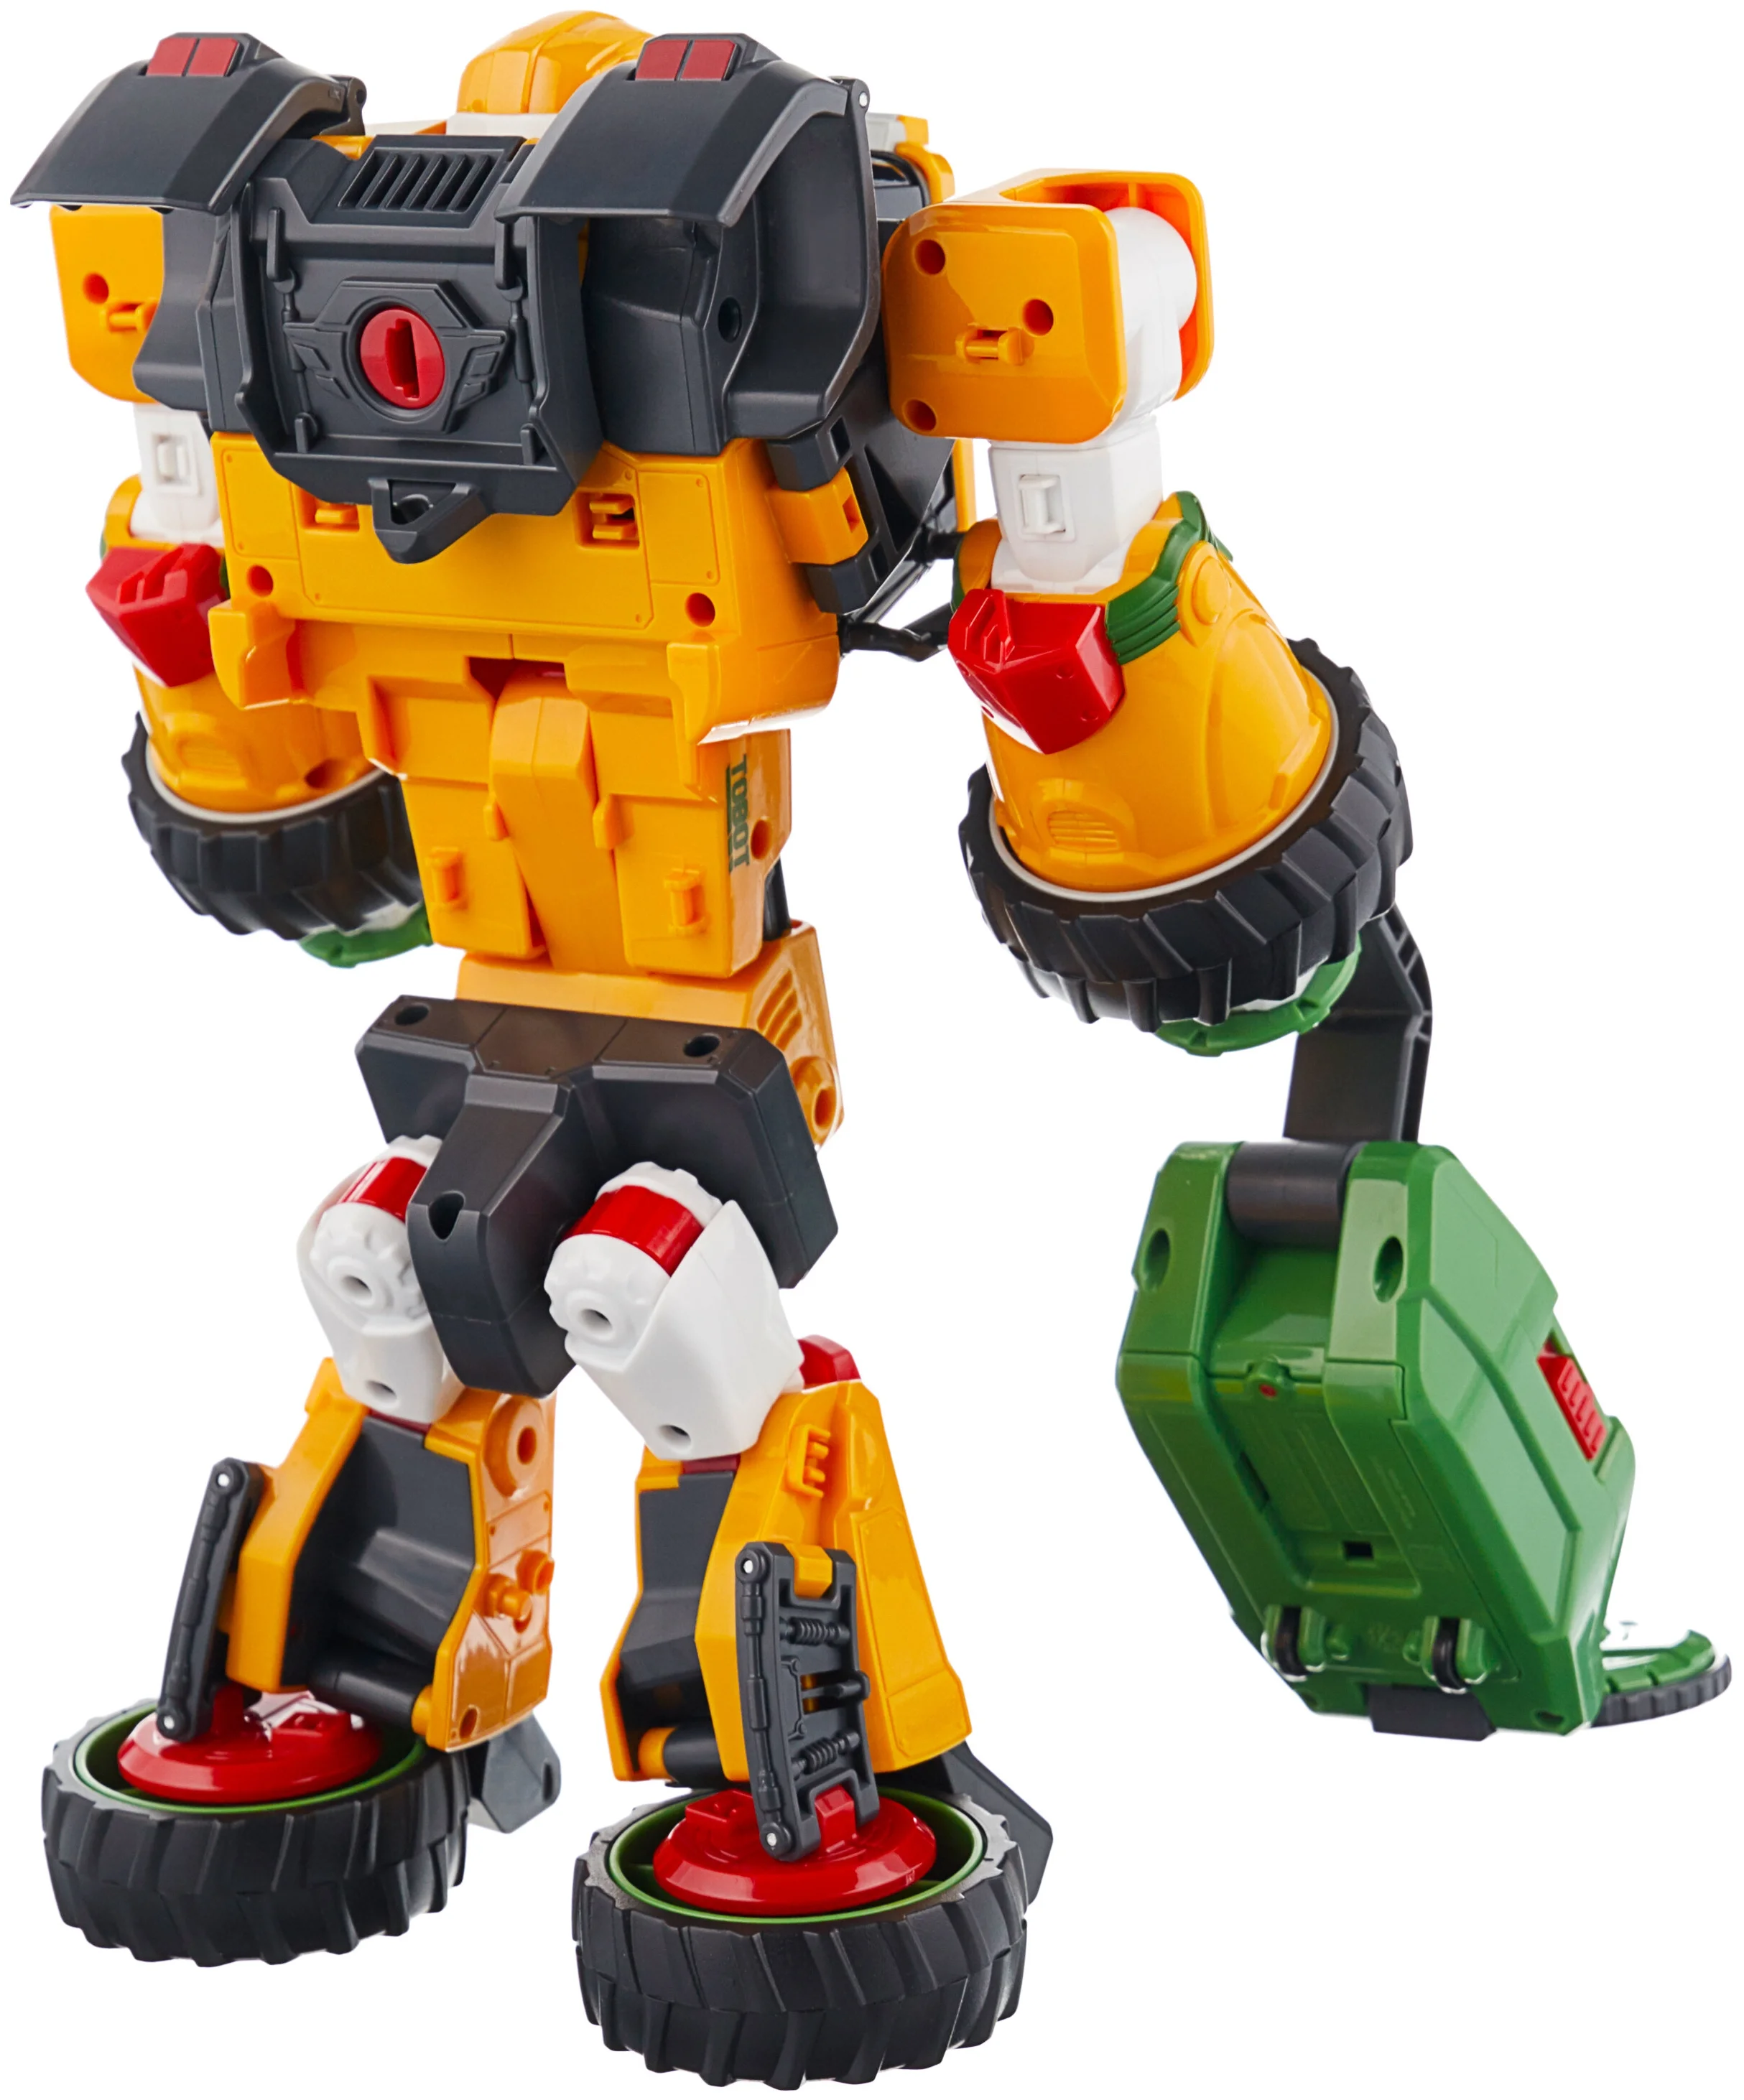 YOUNG TOYS Tobot T 301047 - питание: от батареек